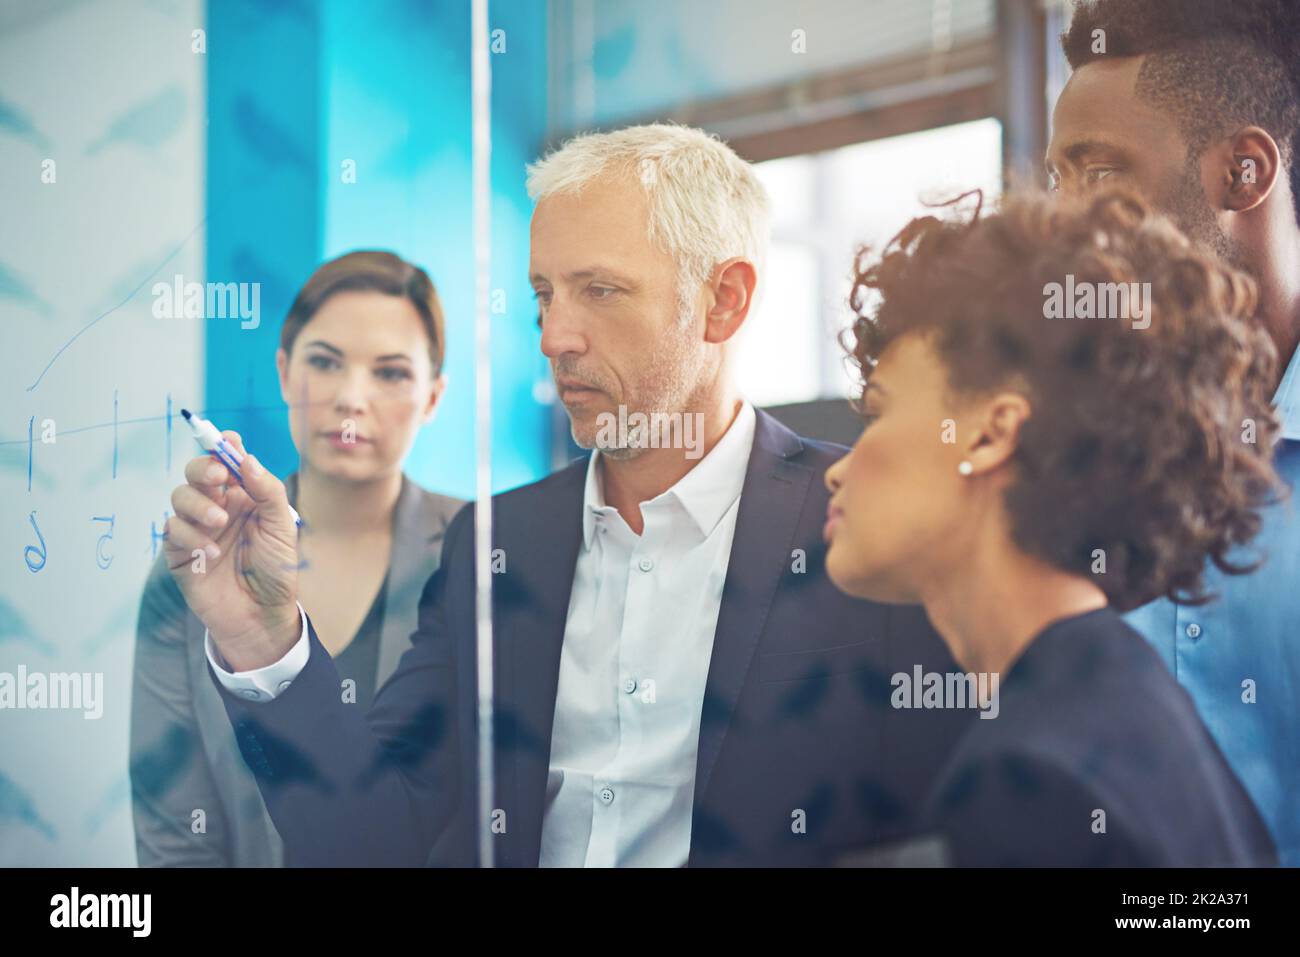 Problem solving through teamwork and professionalism. Shot of a group of colleagues having a brainstorming session at work. Stock Photo